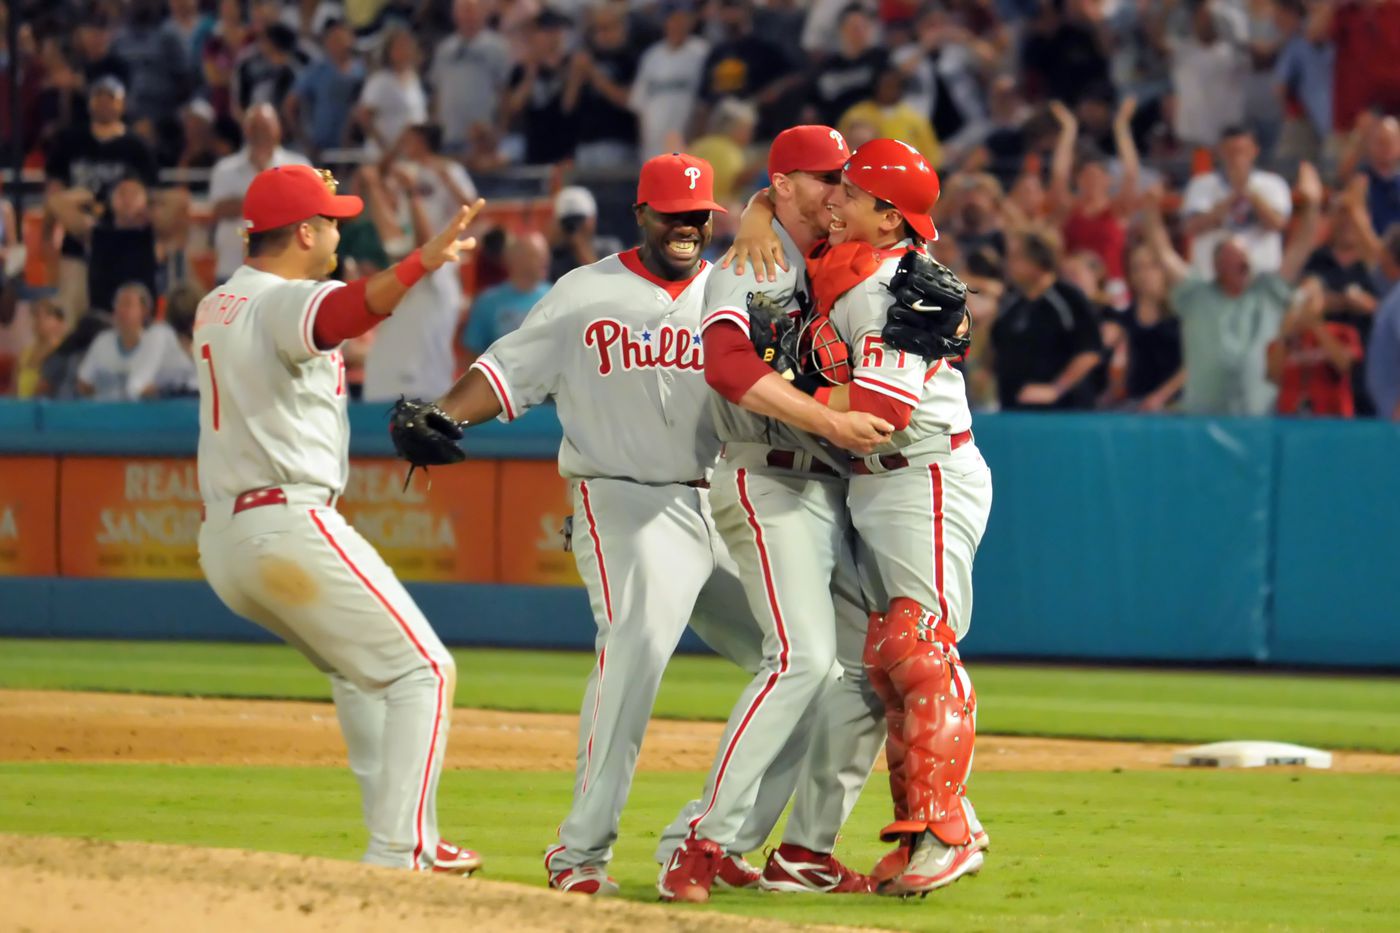 roy halladay perfect game